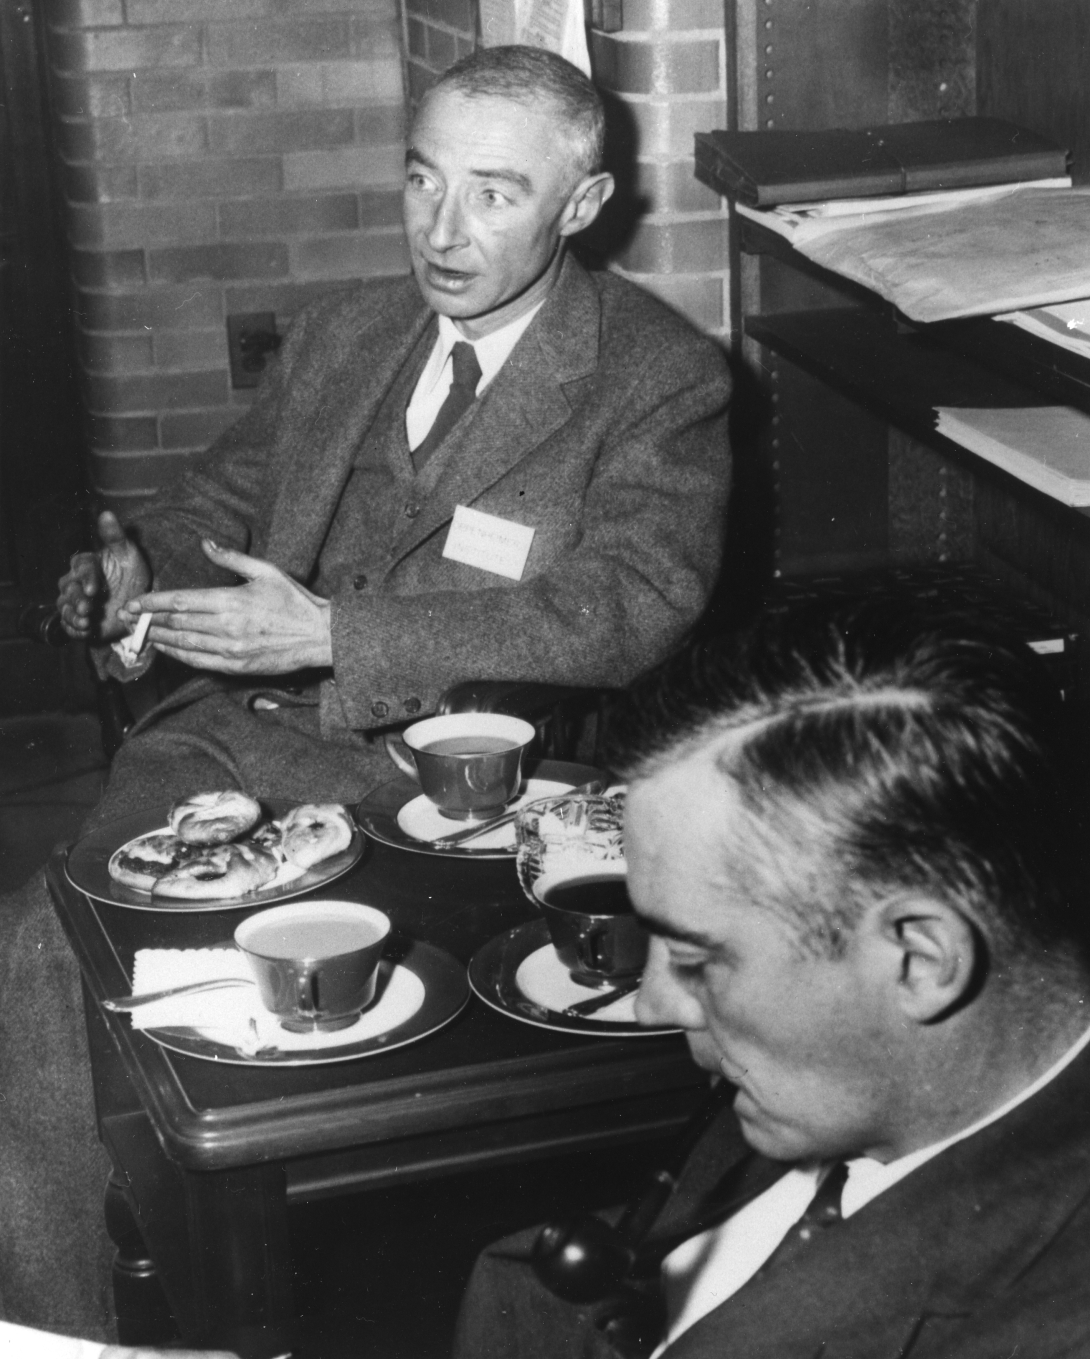 Oppenheimer and another man, both in suits, sit at a small table with cups of tea and plates of pastries in front of them. Oppenheimer wears a nametag and gestures while he talks to someone off camera. The second man is in the foreground looking down while he smokes a pipe.